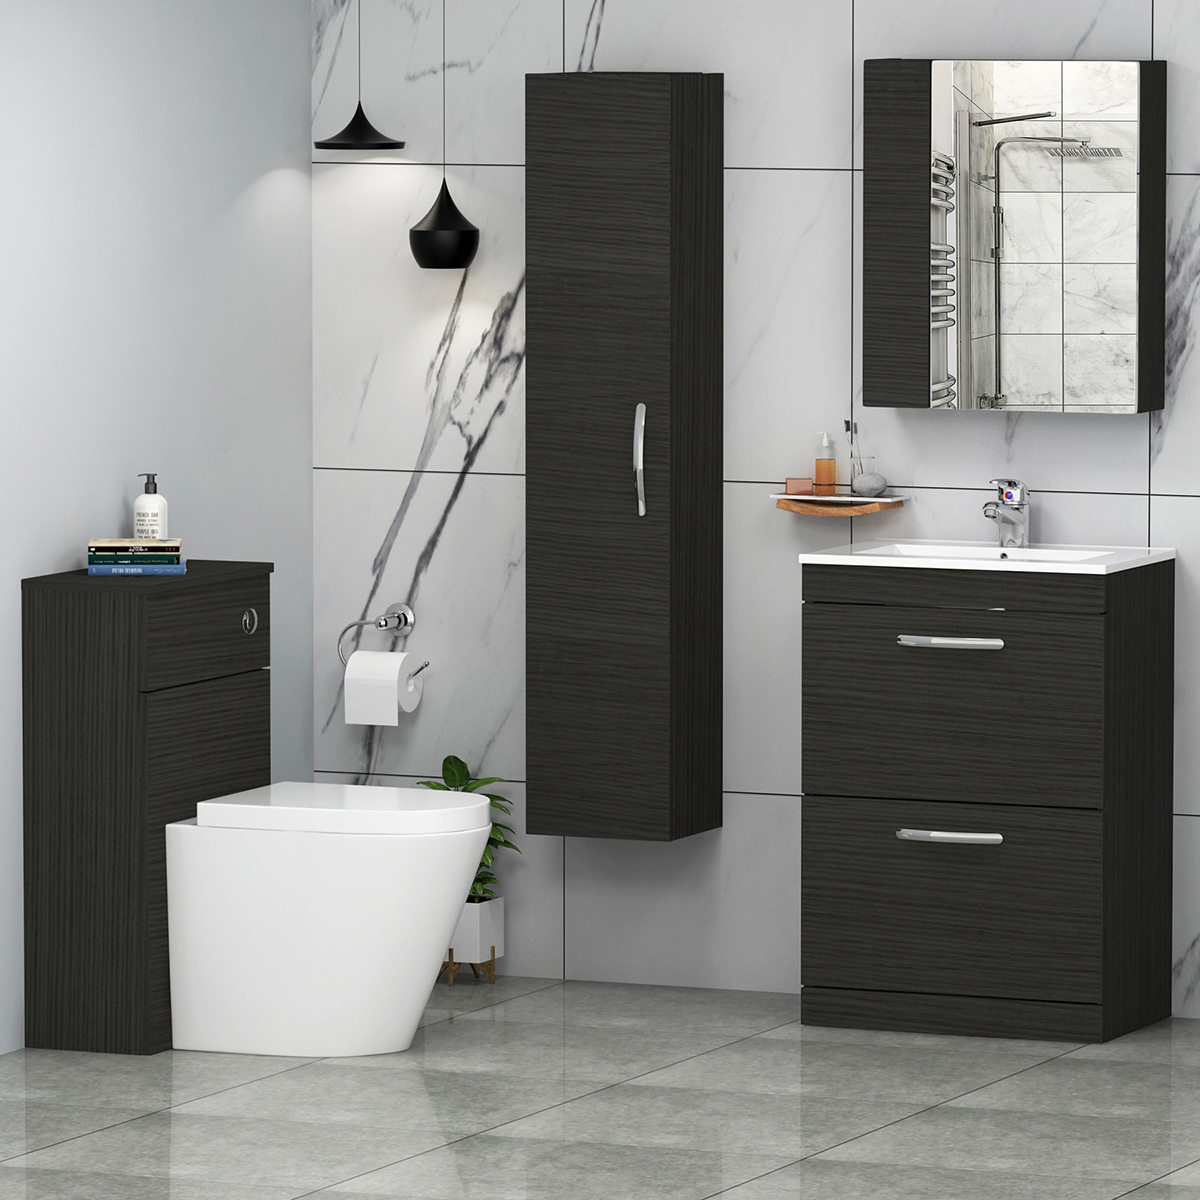 Top Five Tips for Choosing a Perfect Bathroom Storage Cabinet